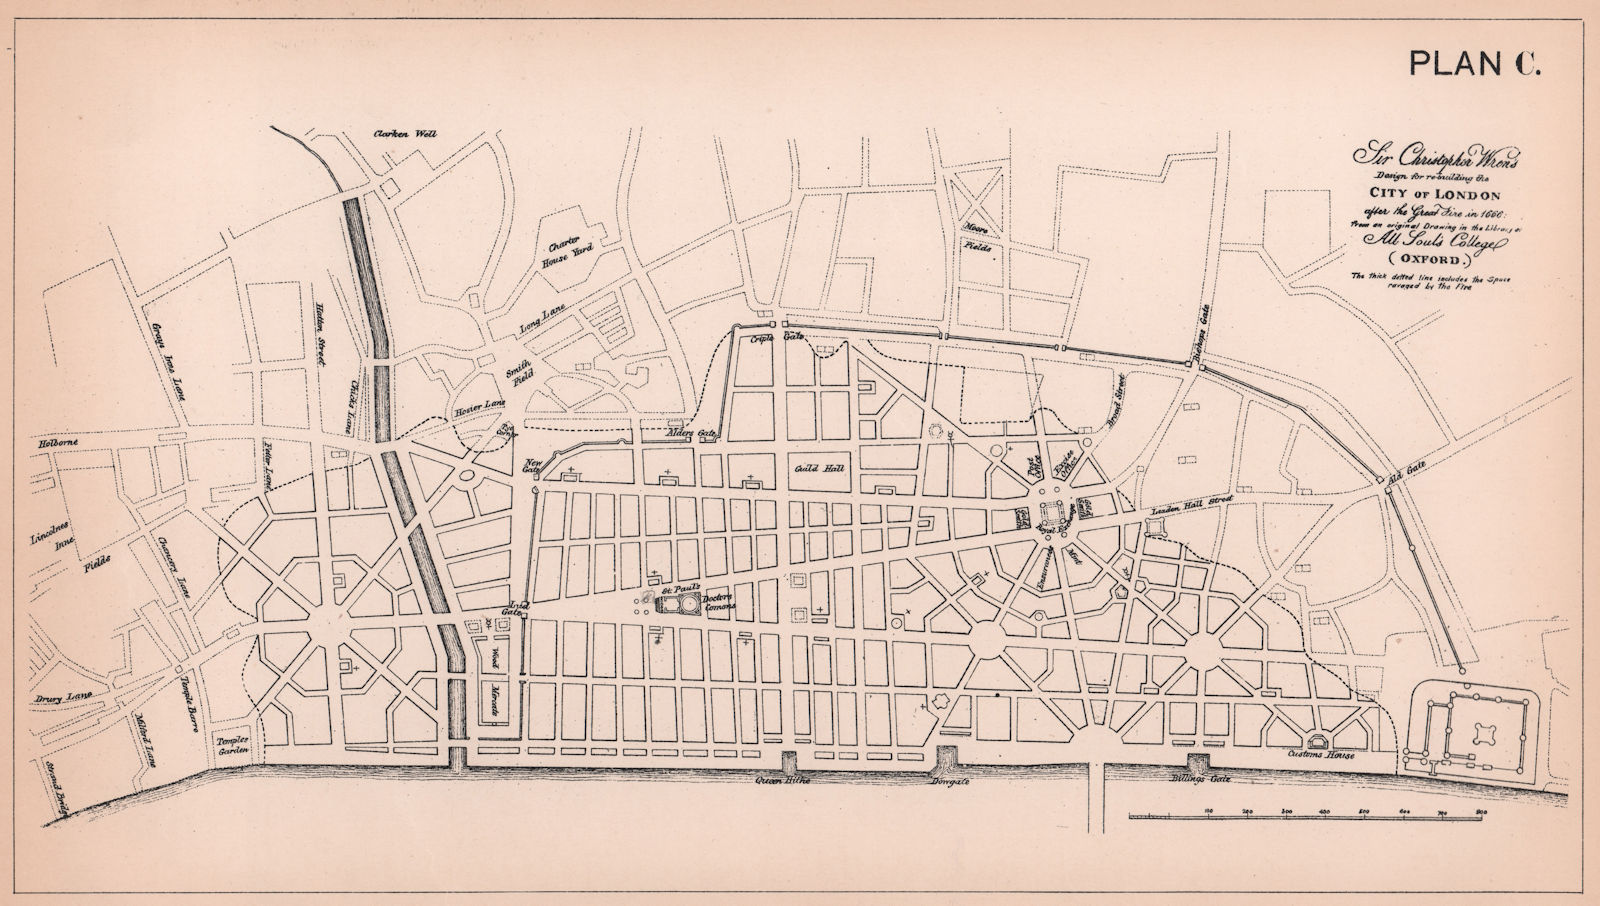 Wren's design for rebuilding the City of London after the Great Fire 1898 map